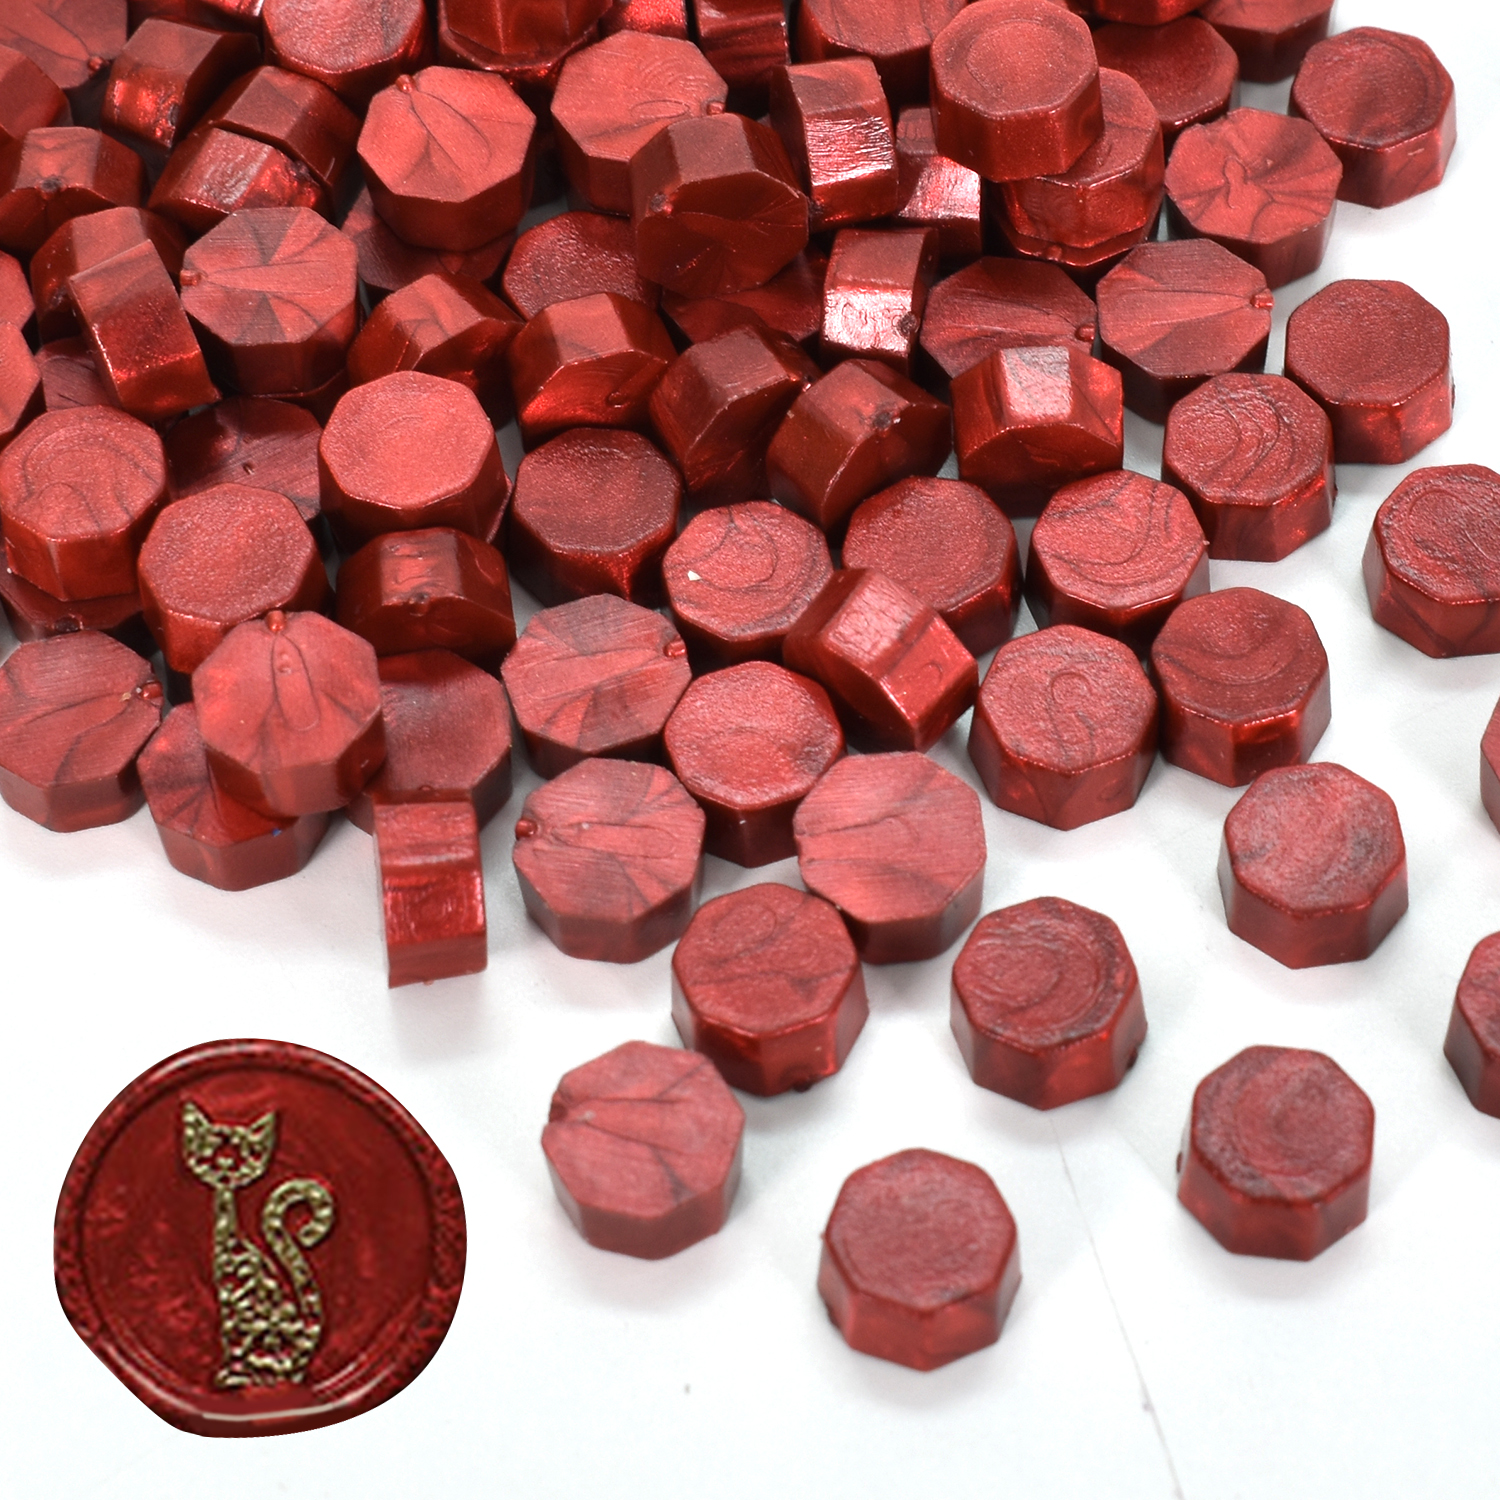 Red Wax For Letters Stamp Seals Sealing Wax Kit With Wax Seal Beads Wax  Seal Warmer Wax Spoon And Candles - Abrasive Tools - AliExpress